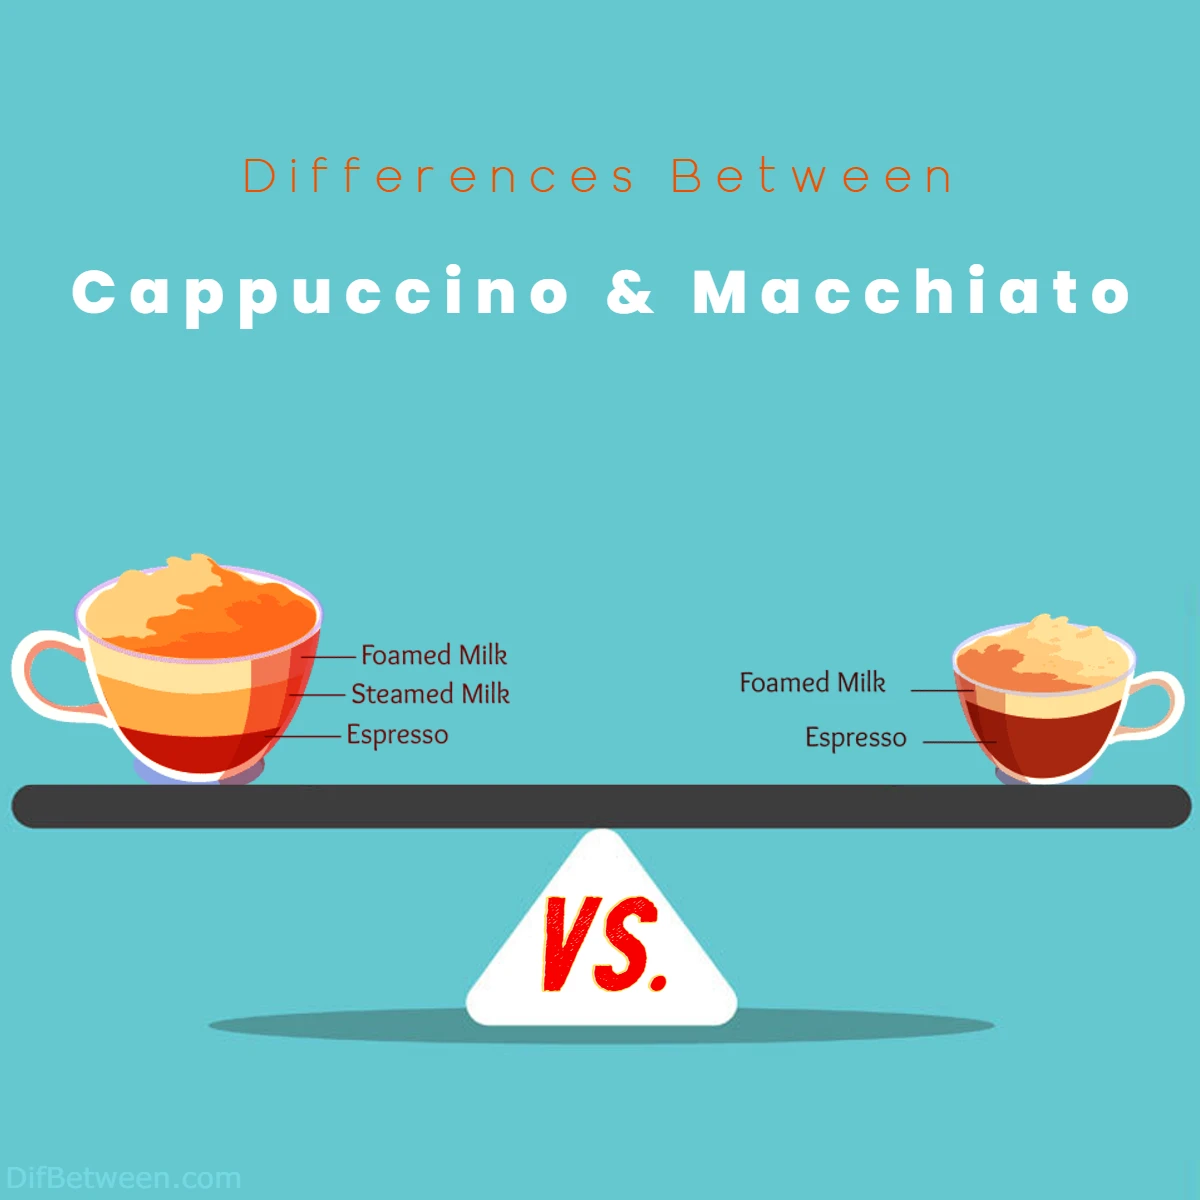 Differences Between Macchiato and Cappuccino